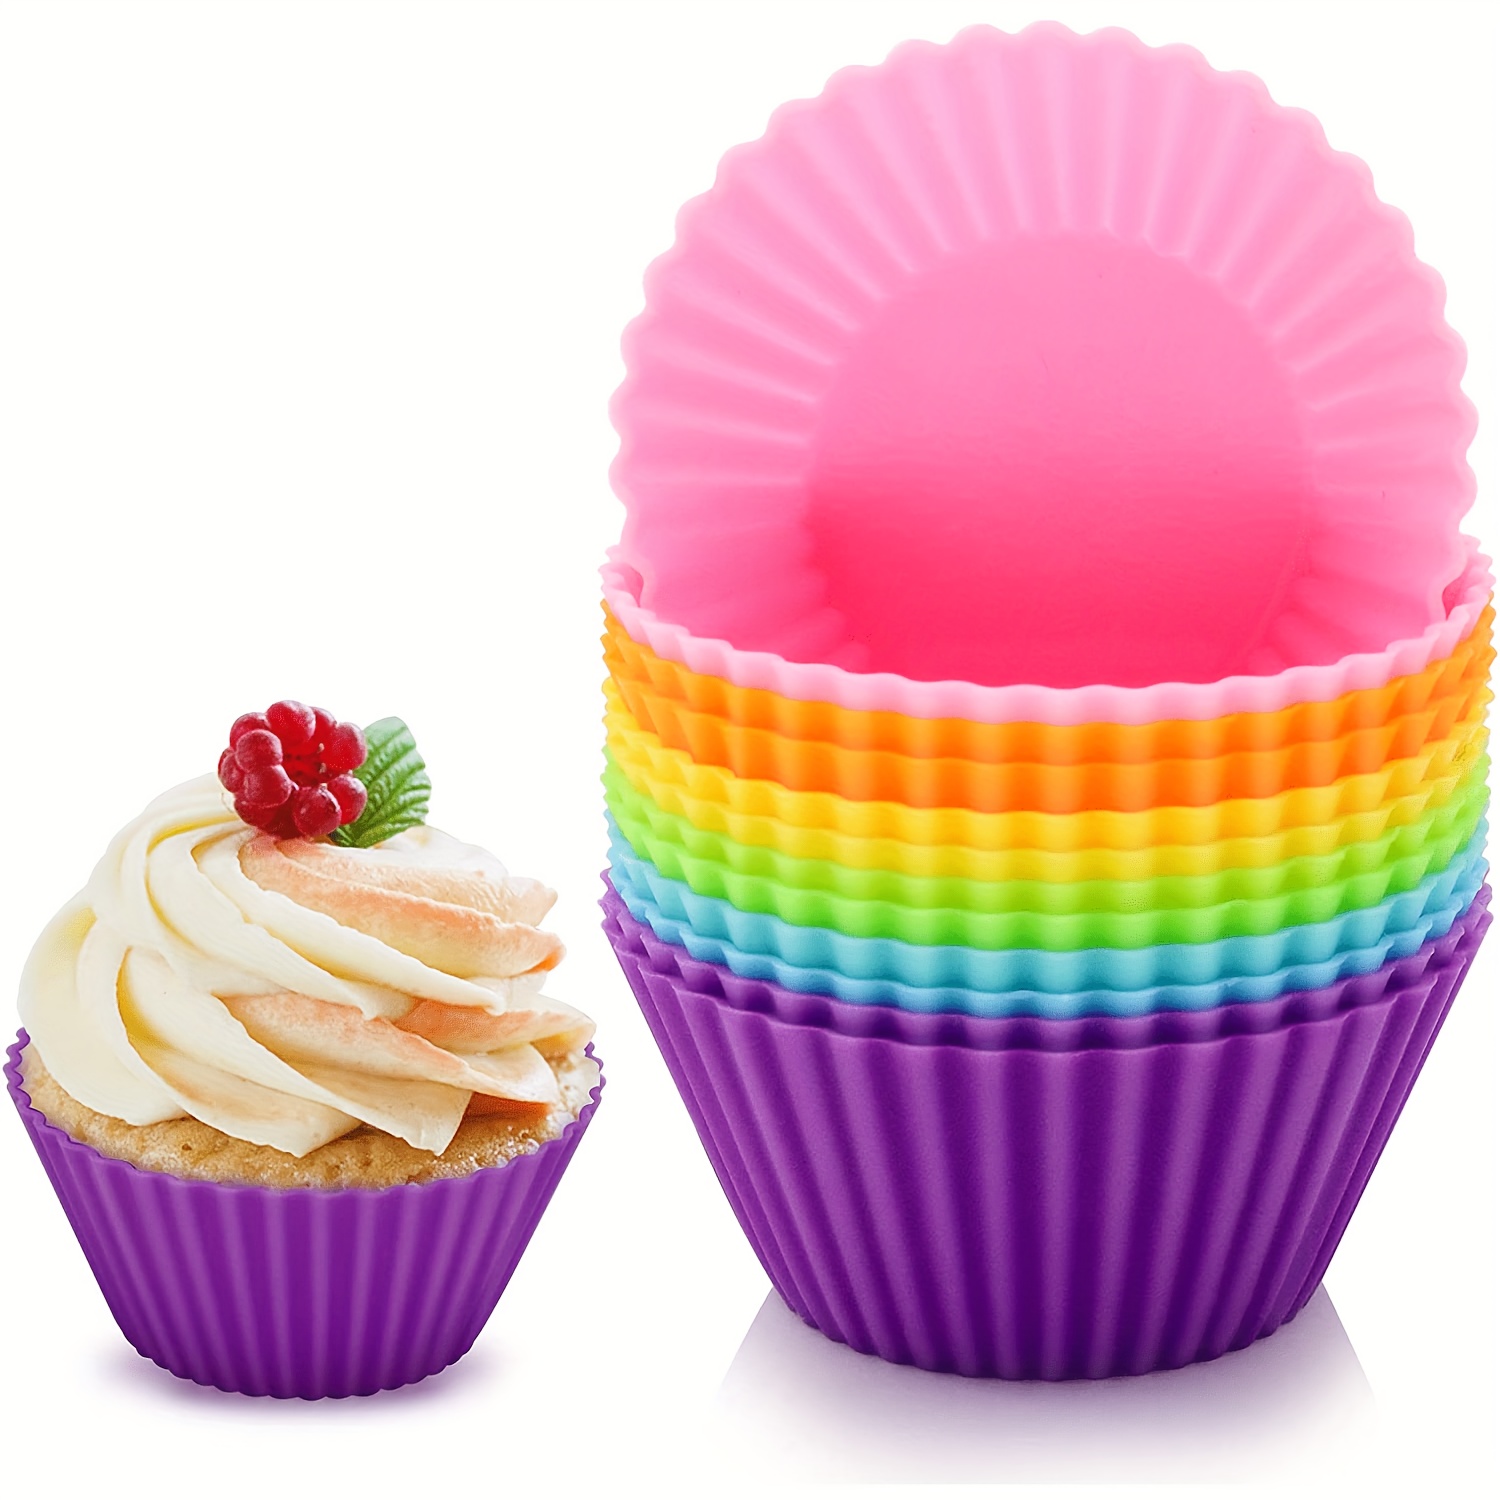 Silicone Cupcake Muffin Baking Cups Liners Reusable Non-Stick Cake Molds  Sets 20pcs 